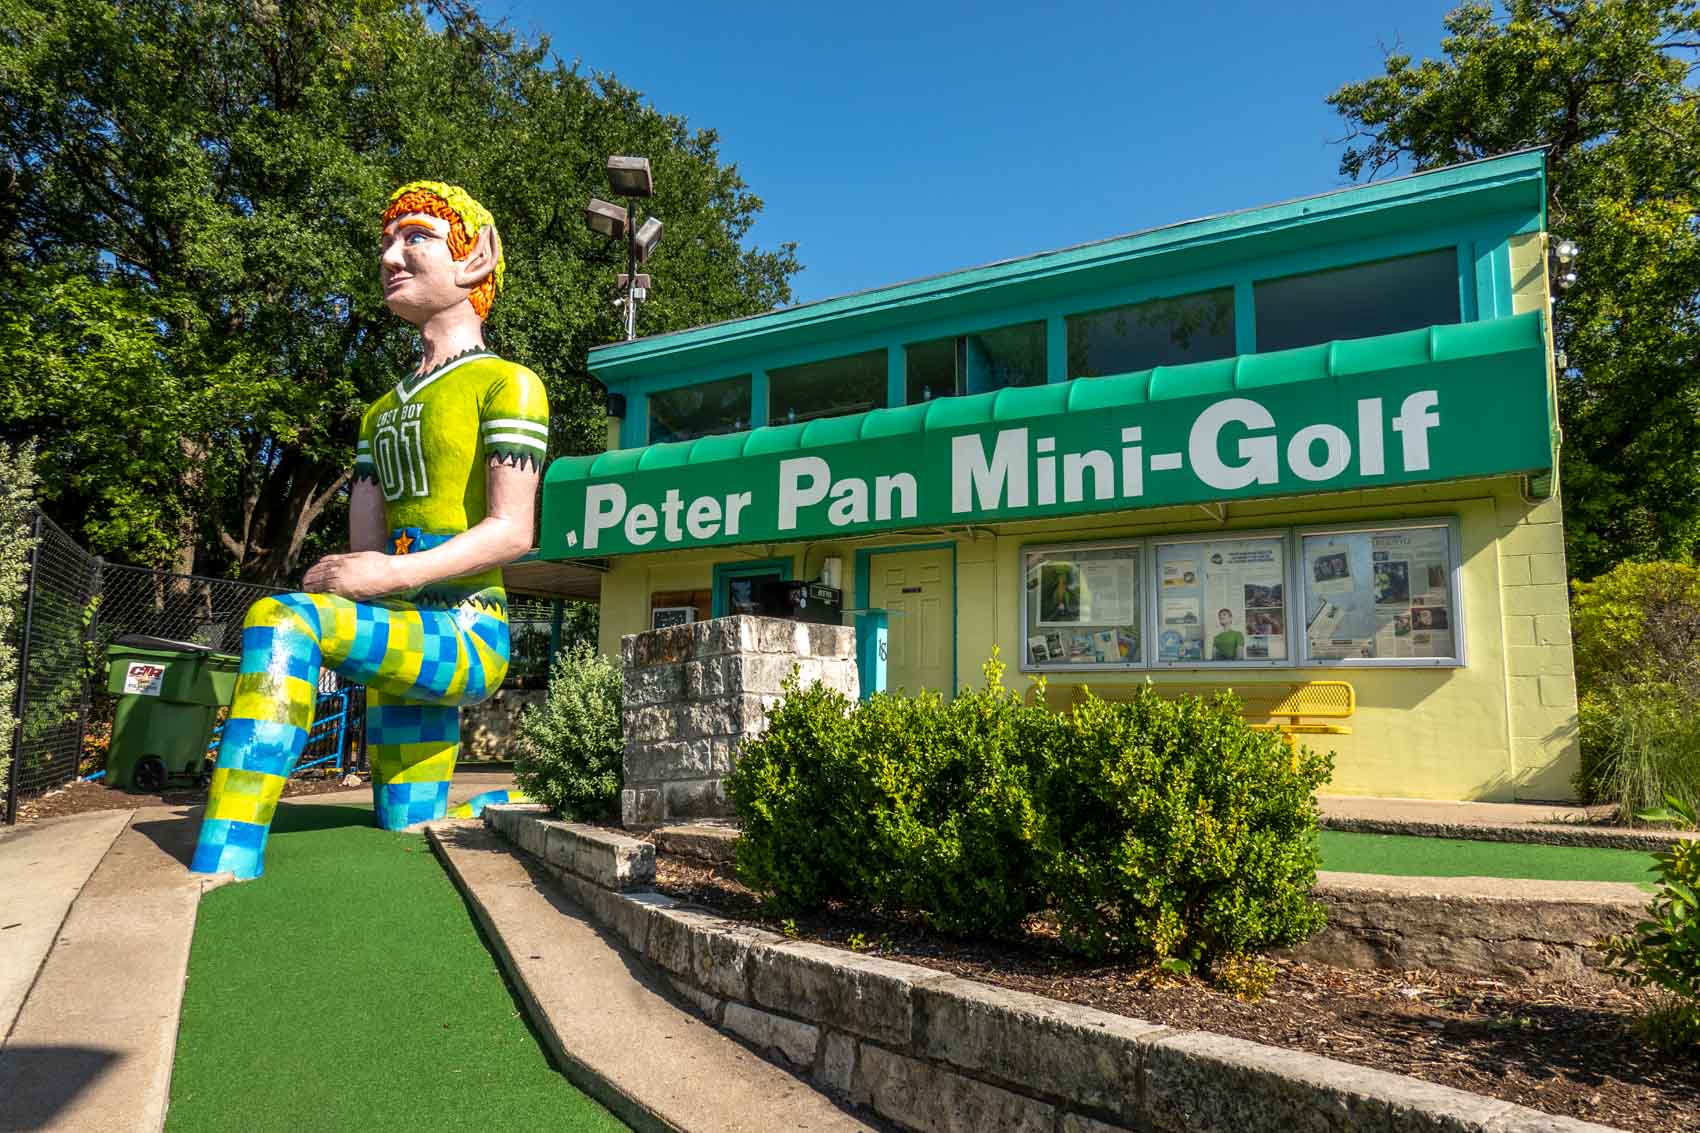 Large statue of Peter Pan in front of a building with a sign for "Peter Pan Mini-Golf"